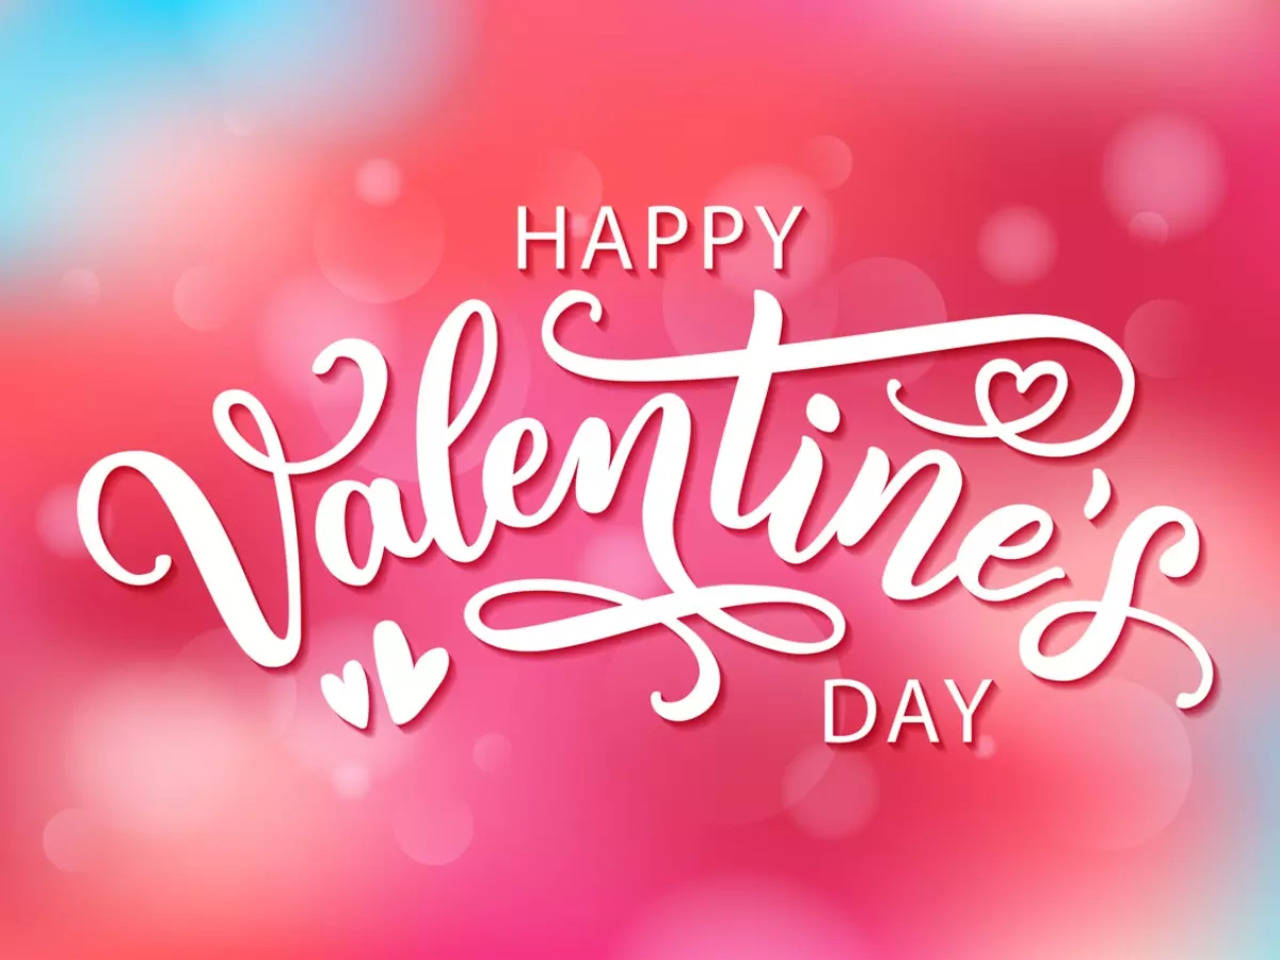 Happy Valentines Day 2023 51 Best Valentines Day Wishes and Messages for girlfriend, boyfriend, husband and wife image